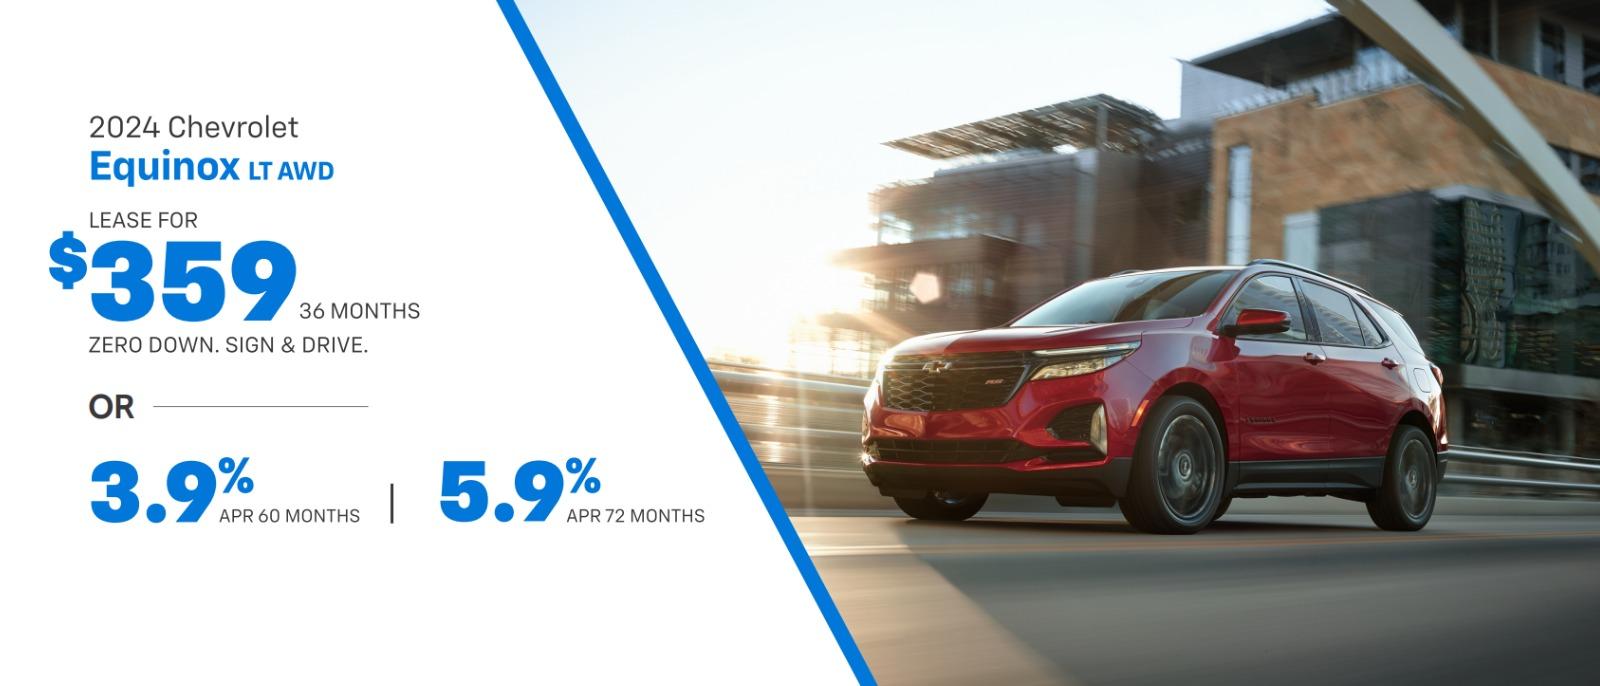 2024 Equinox Lease for $359/mo for 36 mos - Sign & Drive or 3.9% APR for 60 mos